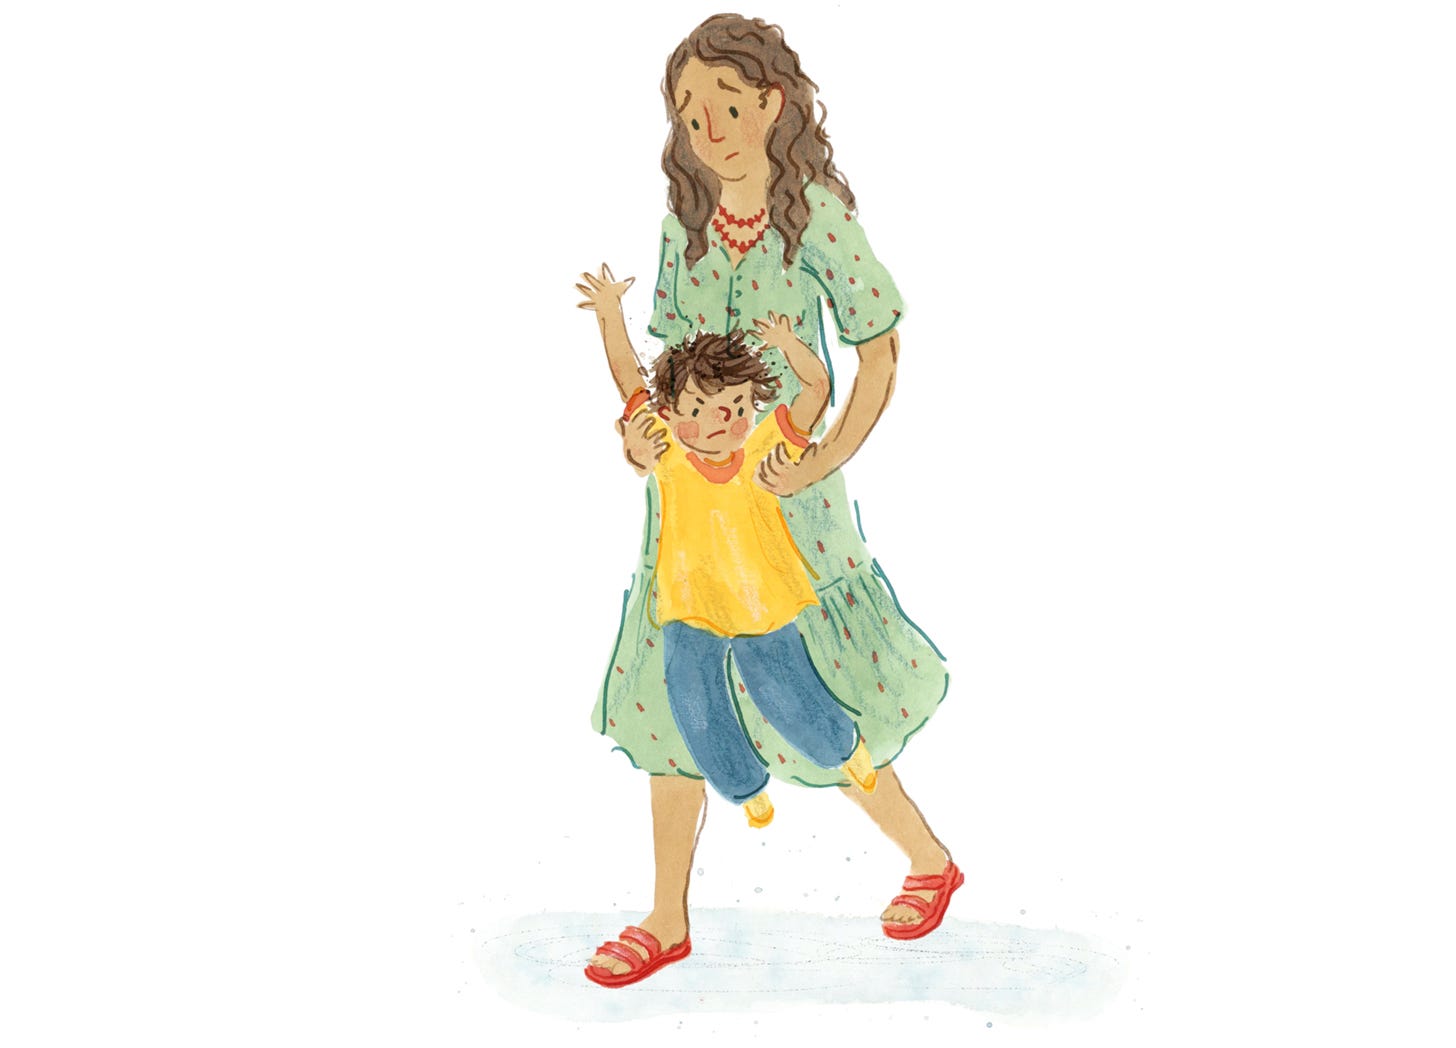 woman in a green dress and red shoes looking concerned carrying a young boy in yellow tshirt who is angry and upset. Watercolour and ink illustration by Nanette Regan